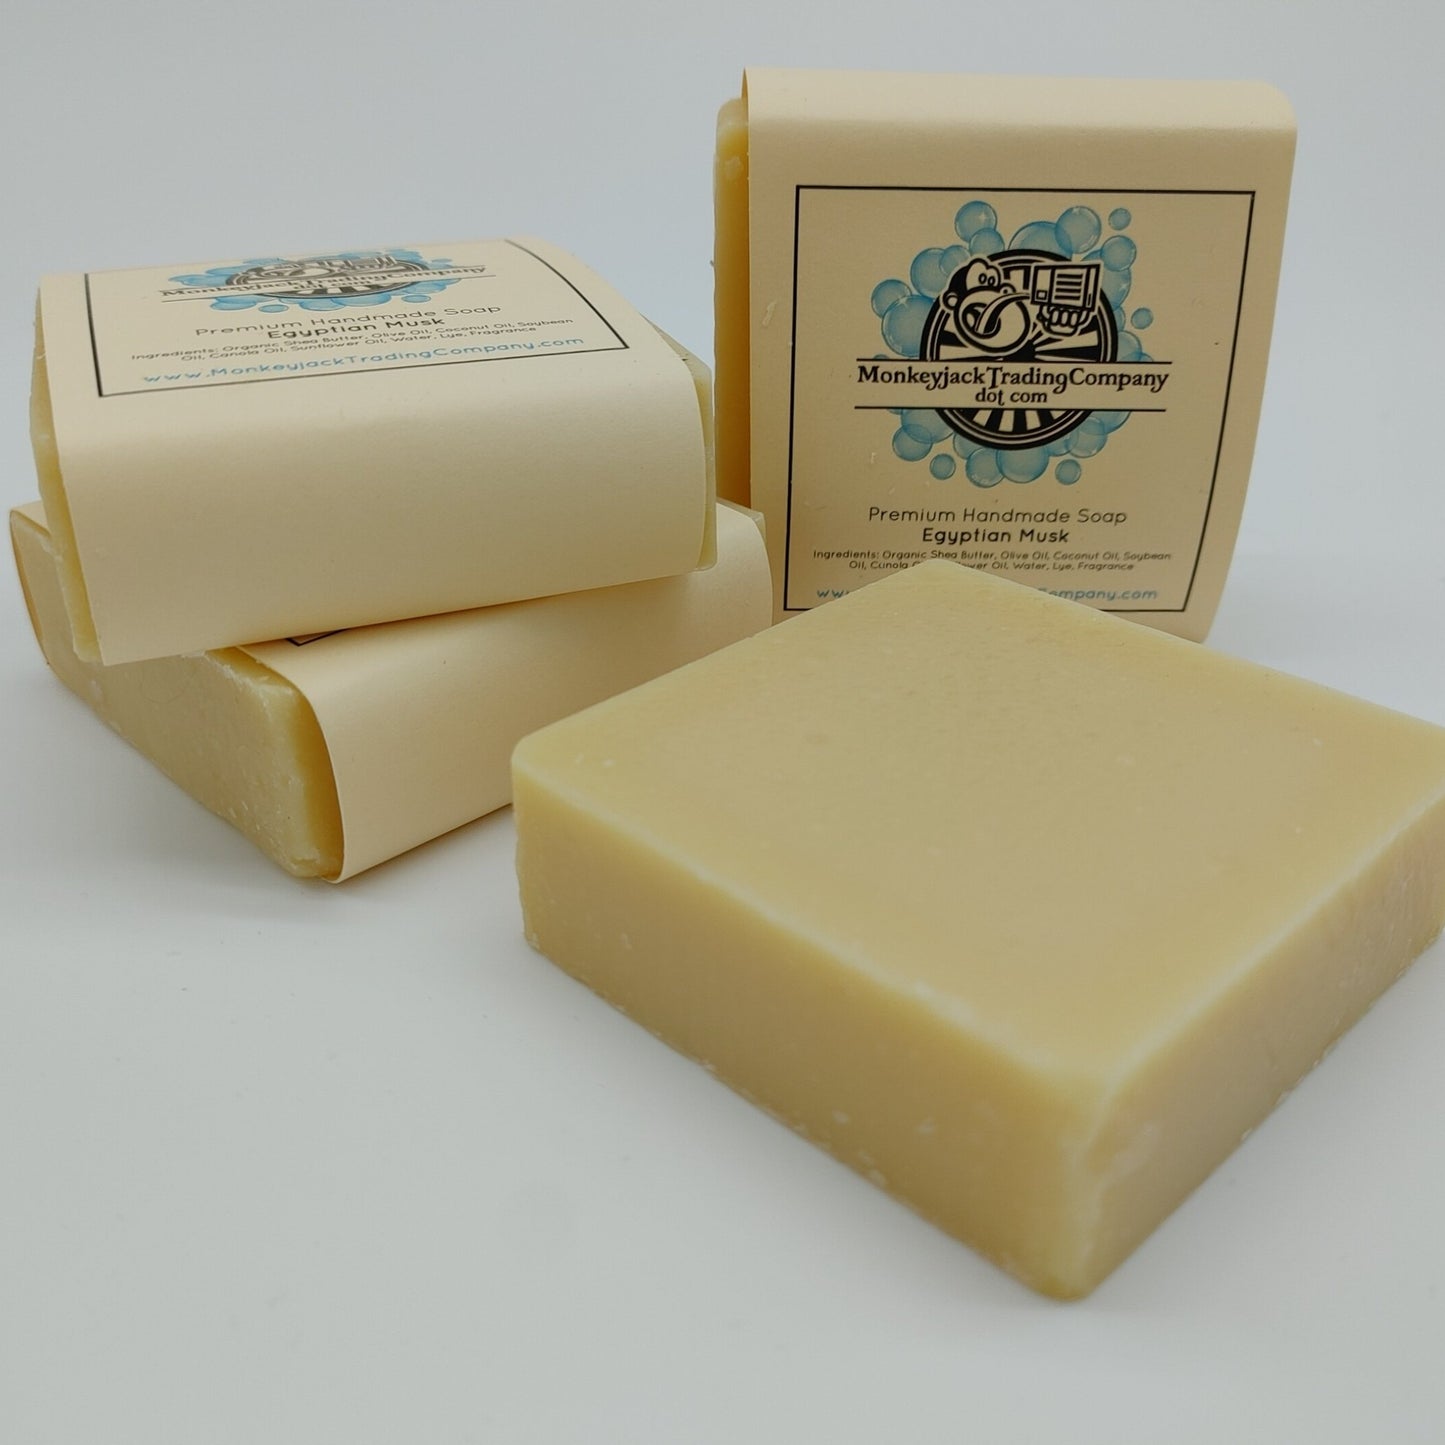 Egyptian Musk Cold Process Soap Bar